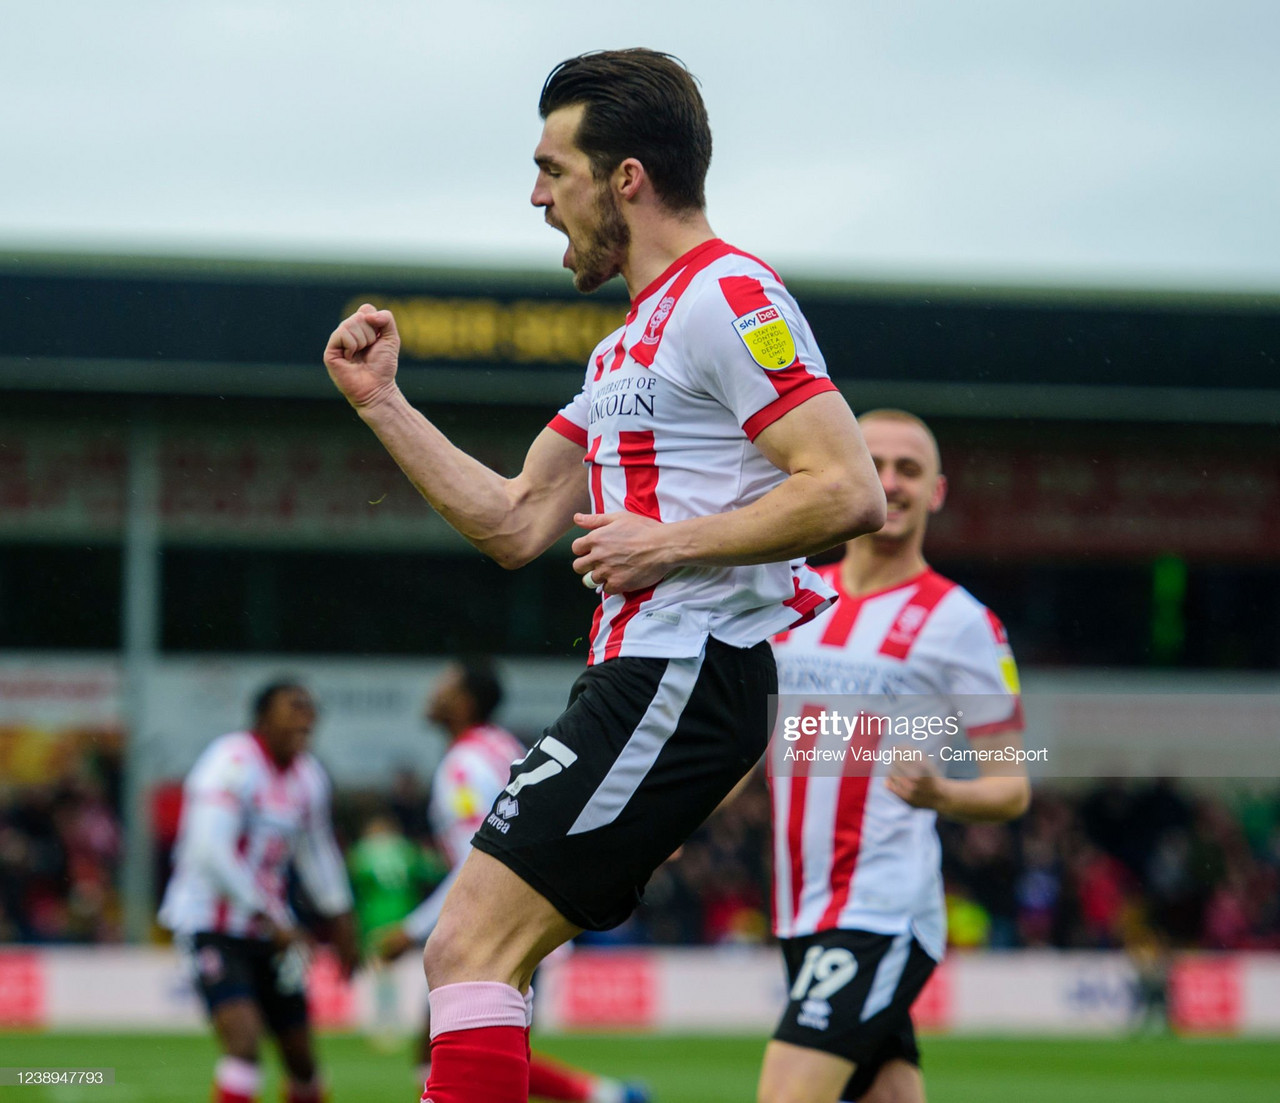 Lincoln City 3-1 Sheffield Wednesday: Marquis masterclass sees off Wednesday